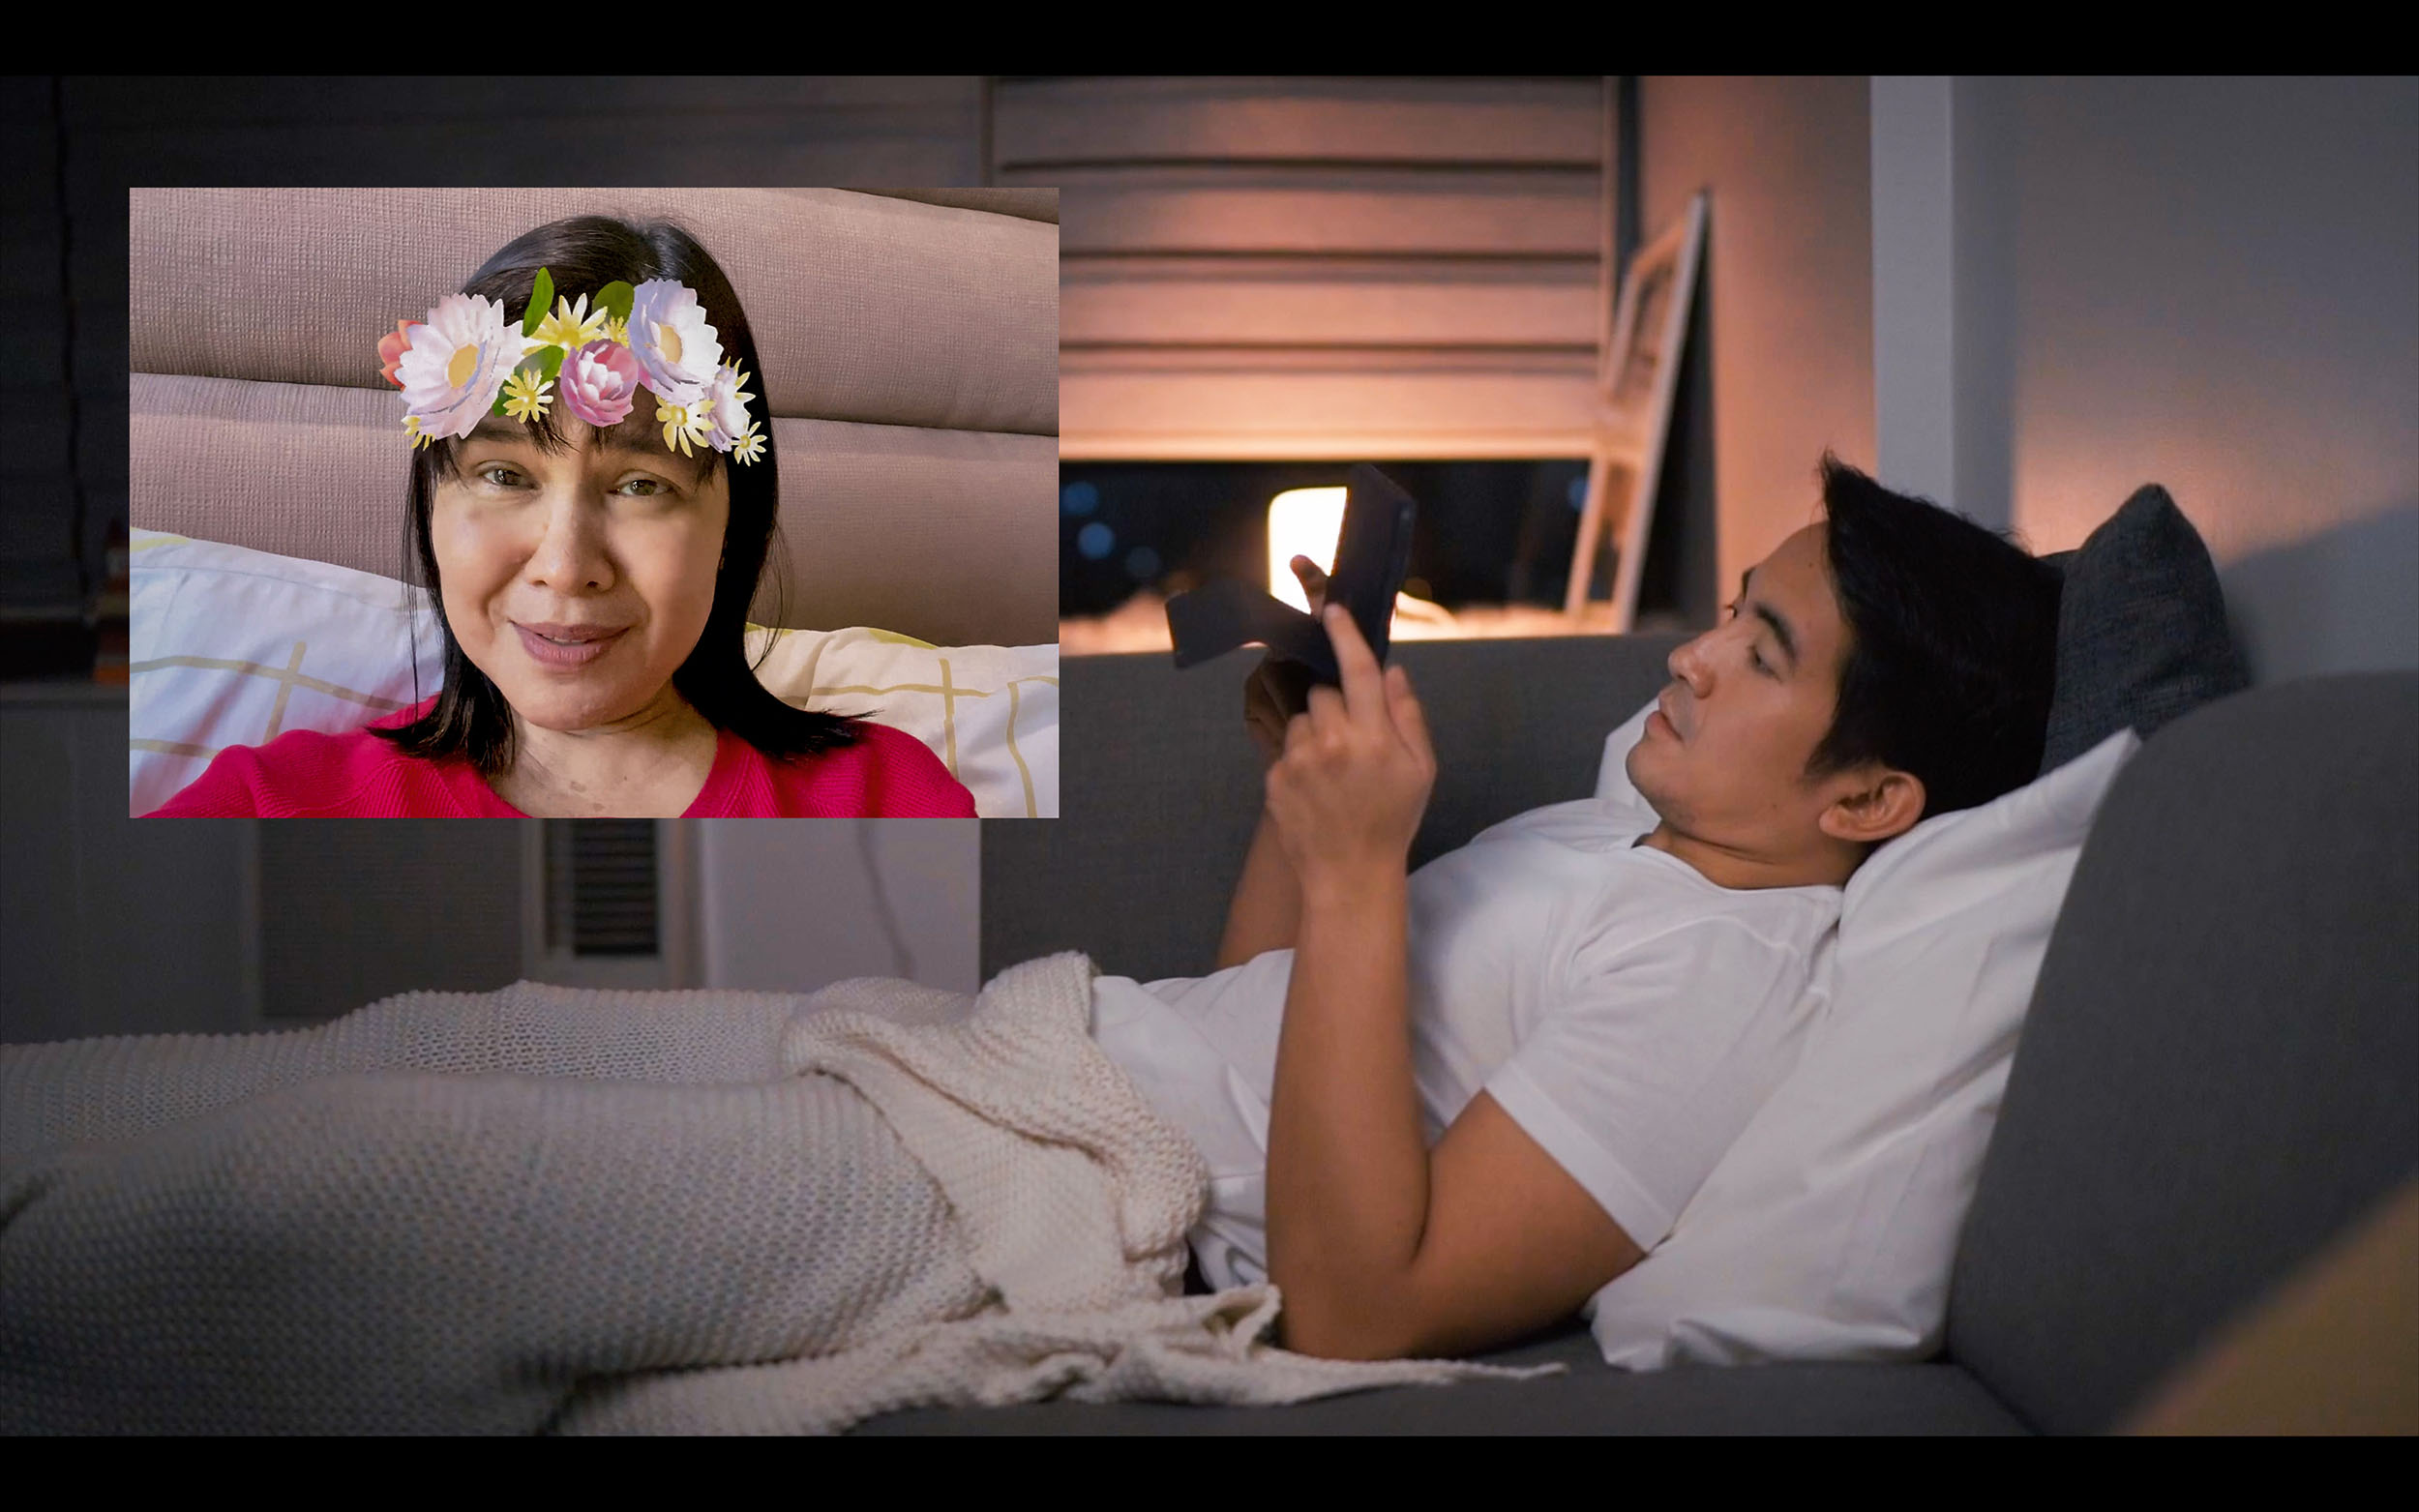 “Ngayon, Ako Naman Ma” video brings us all the feels this Mother’s Day